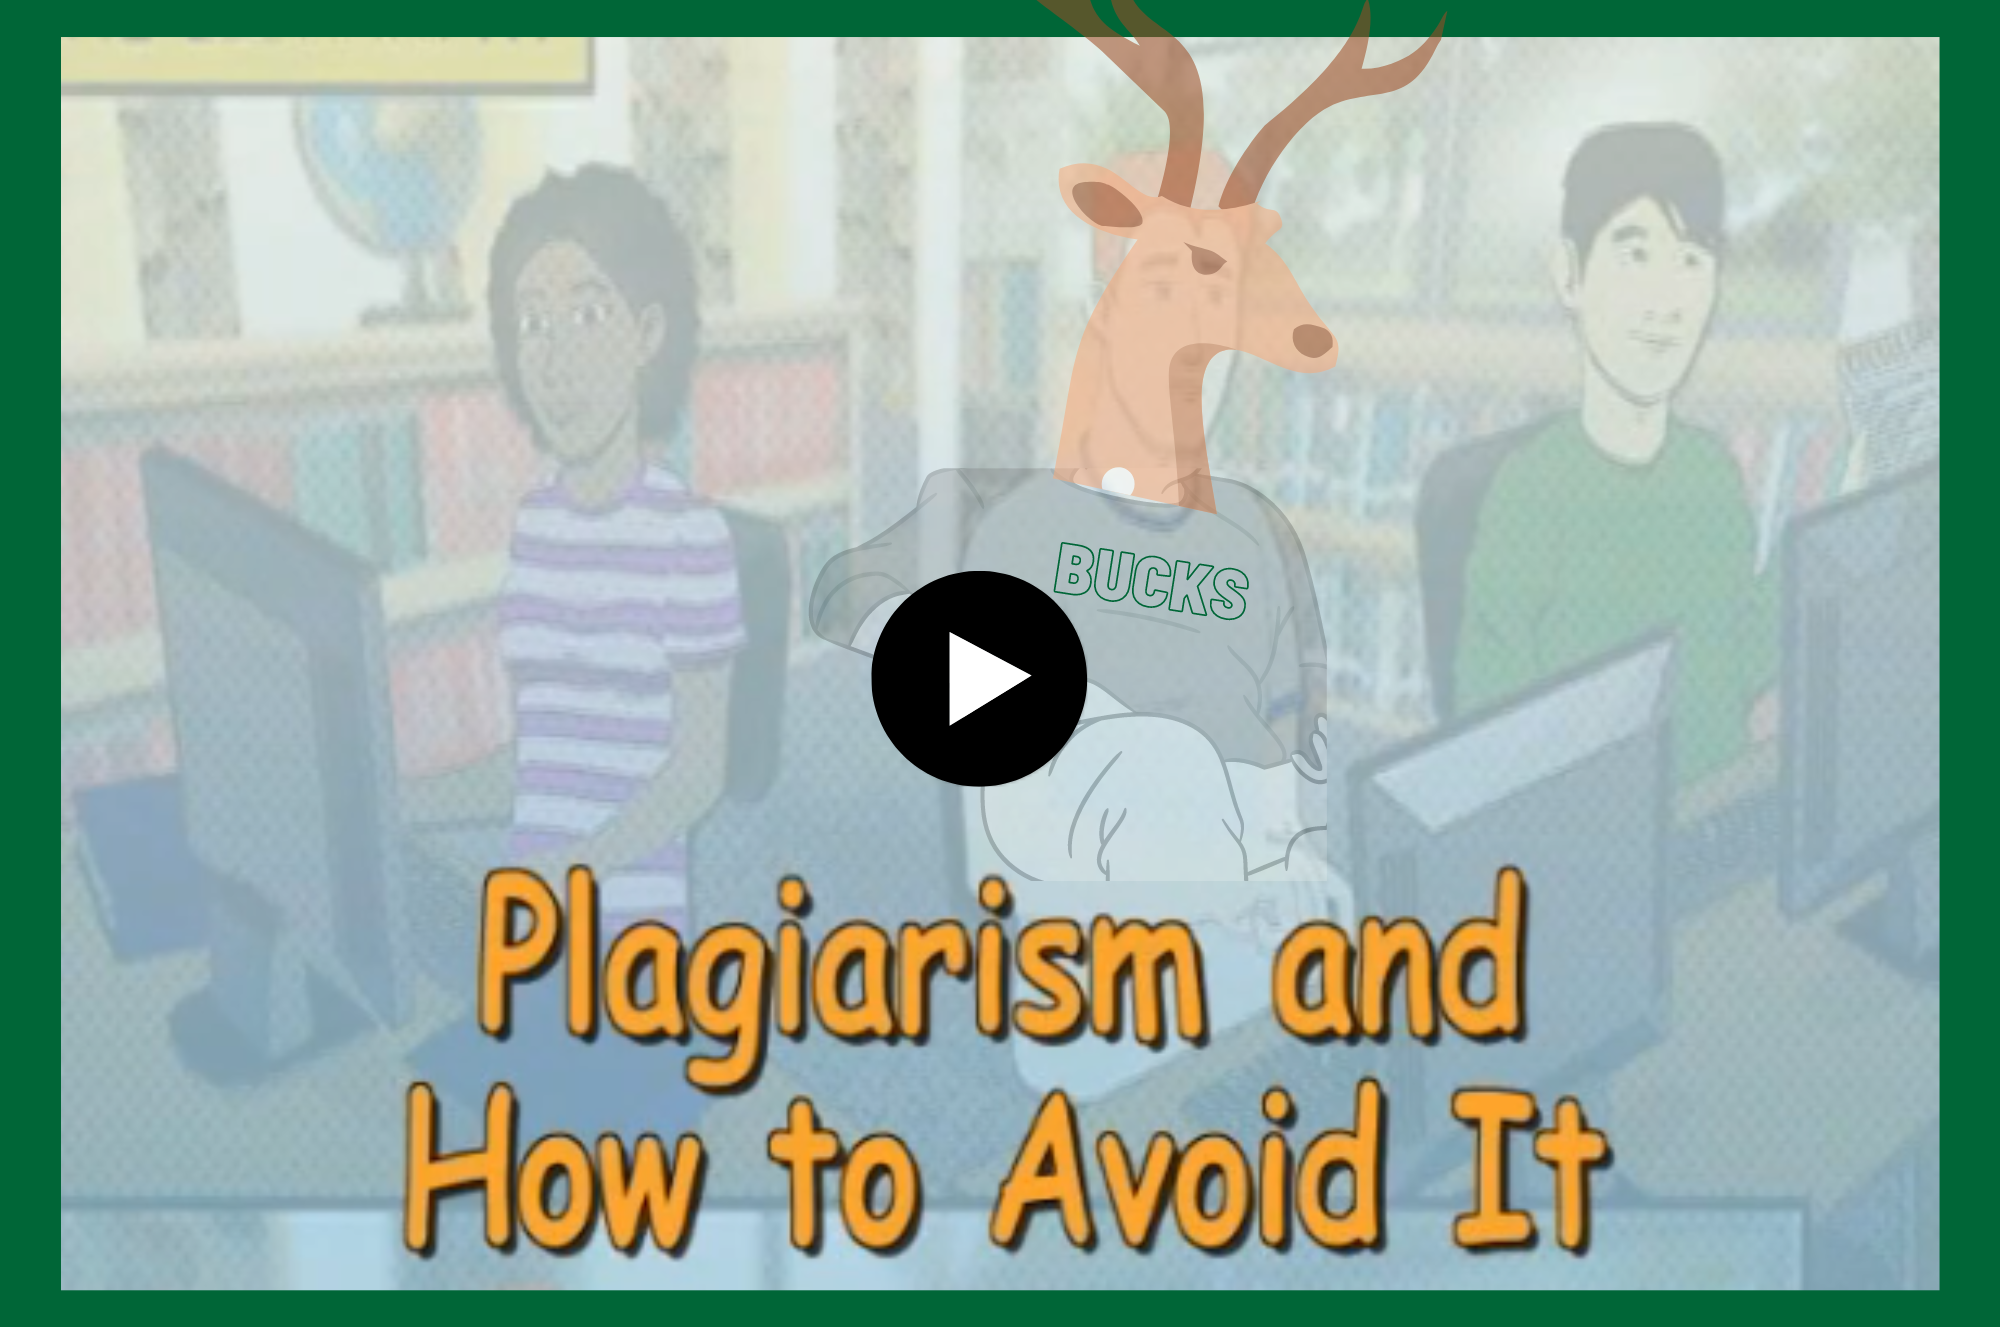 Plagiarism and How to Avoid it - Link to video segment